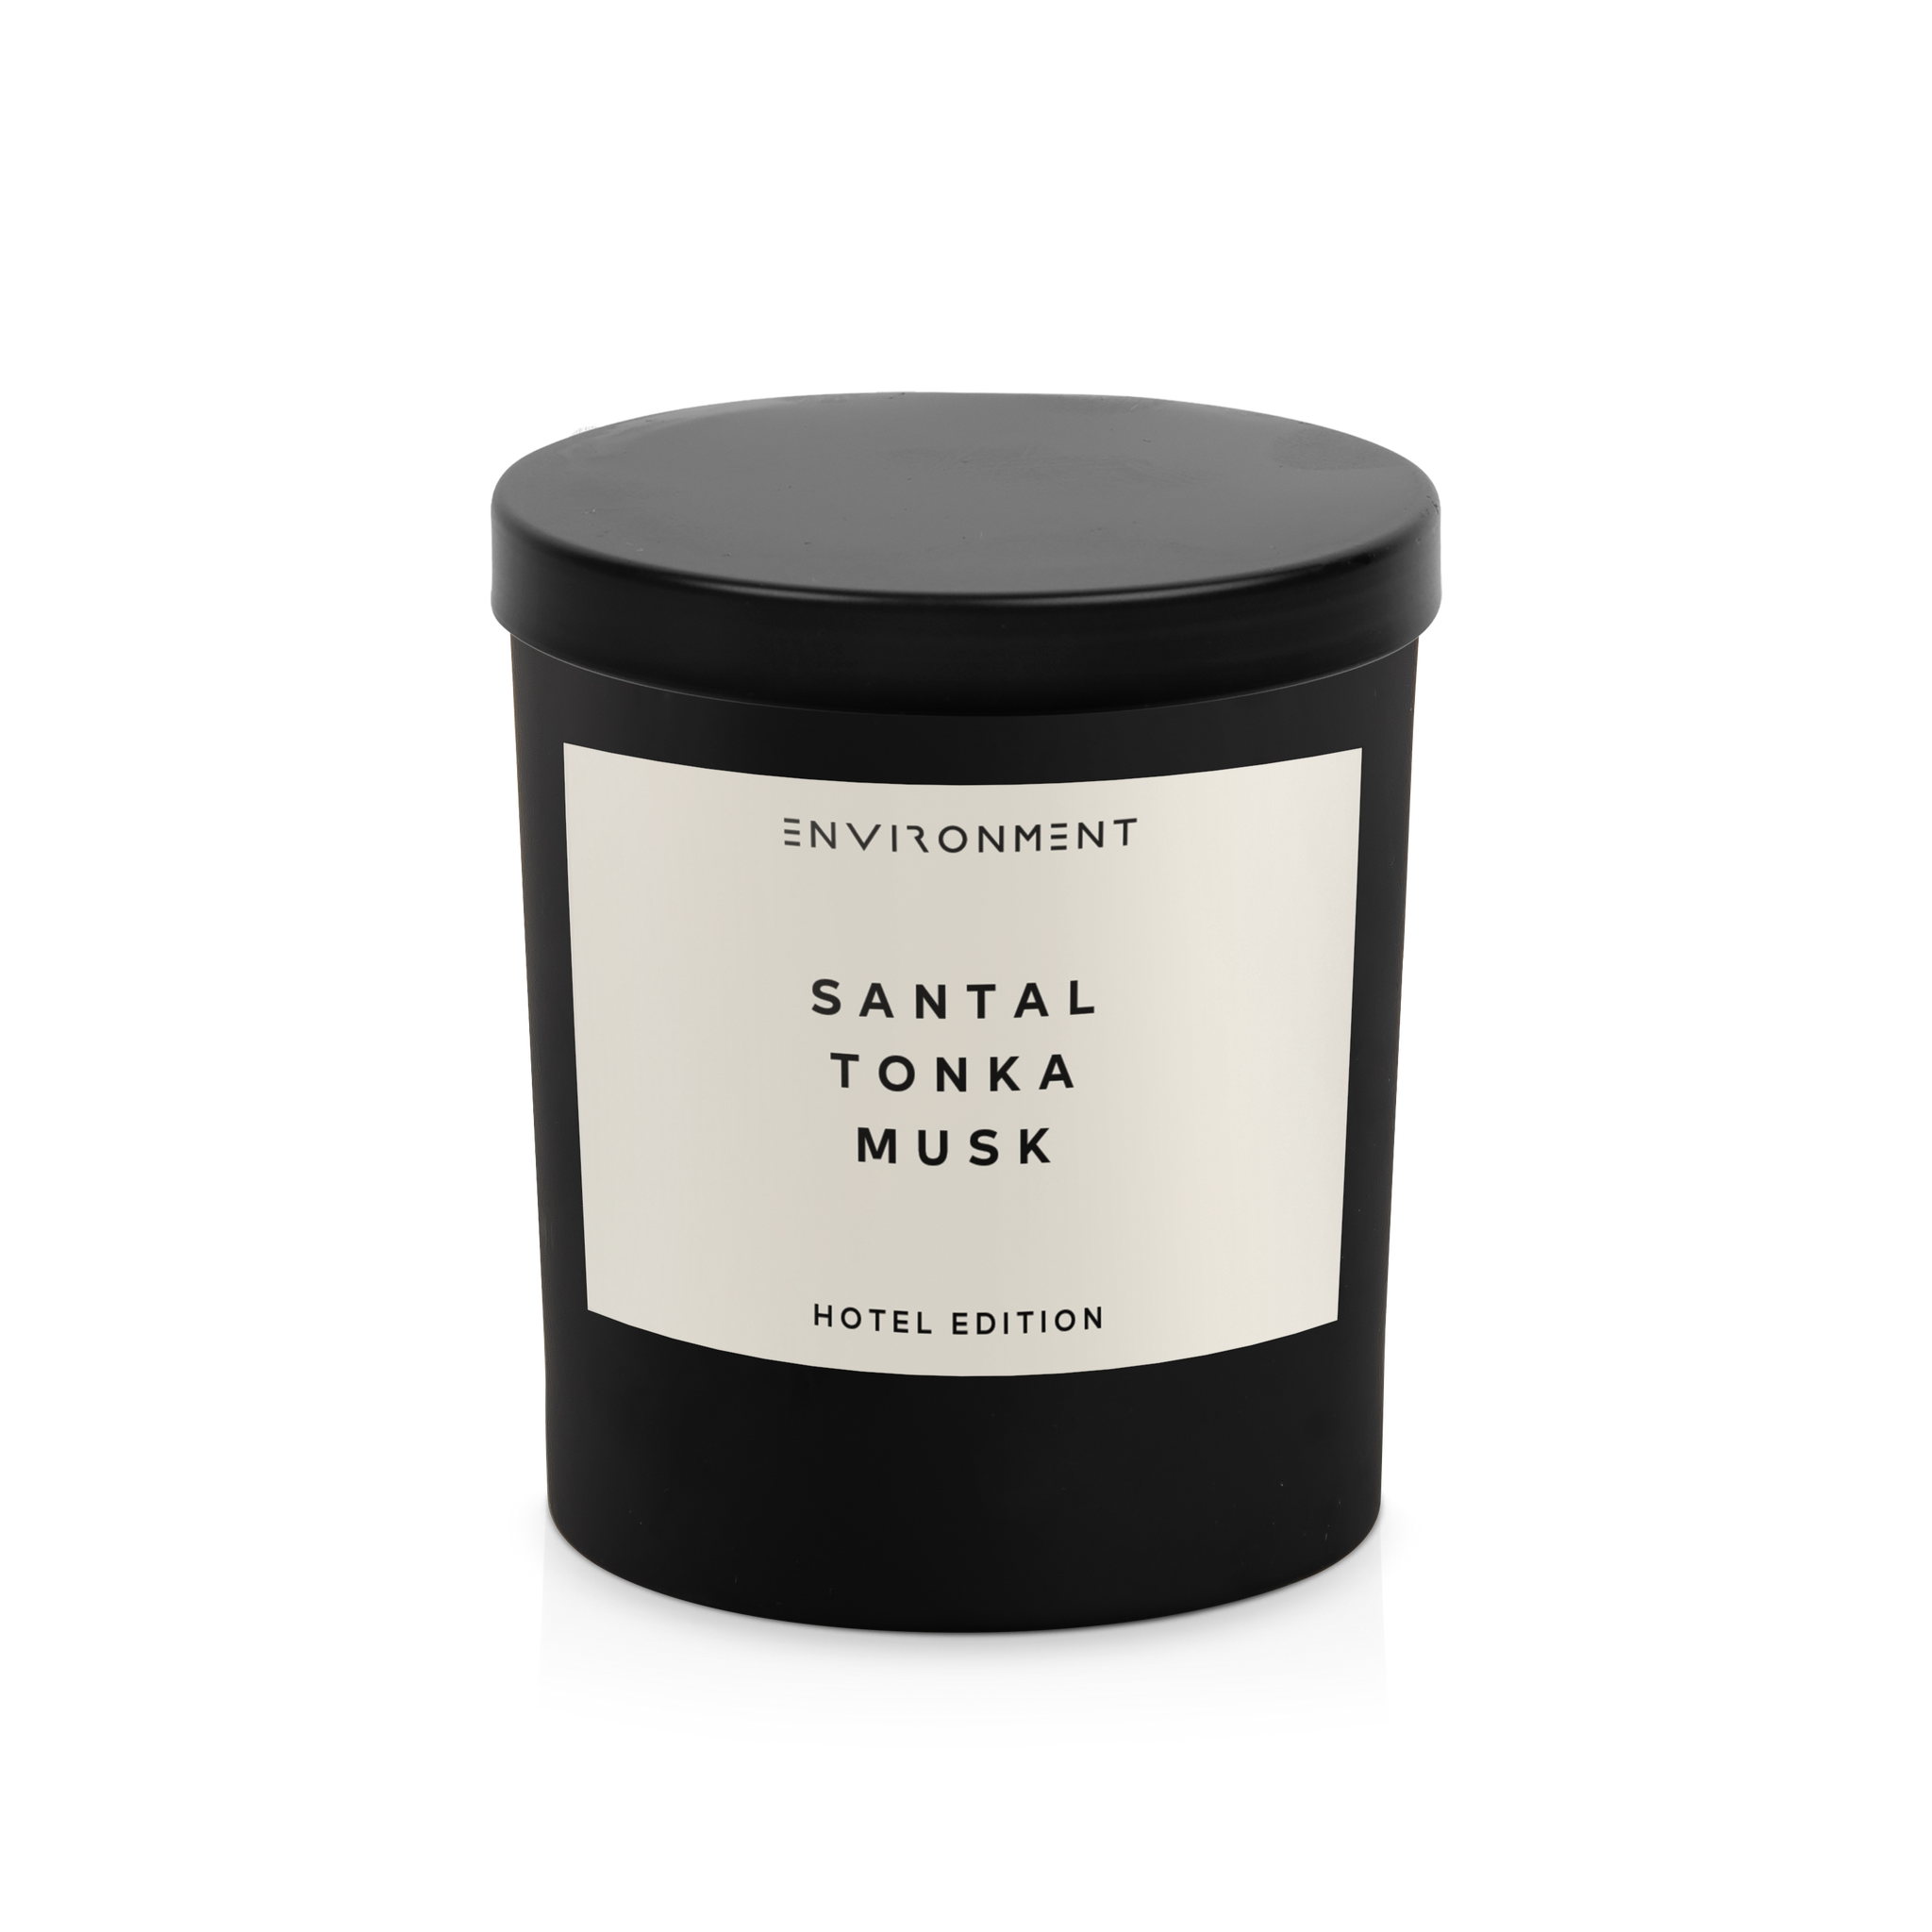 Santal | Tonka | Musk 200ml Diffuser and 8oz Candle Gift Pack (Inspired by Le Labo Santal® and 1 Hotel®)